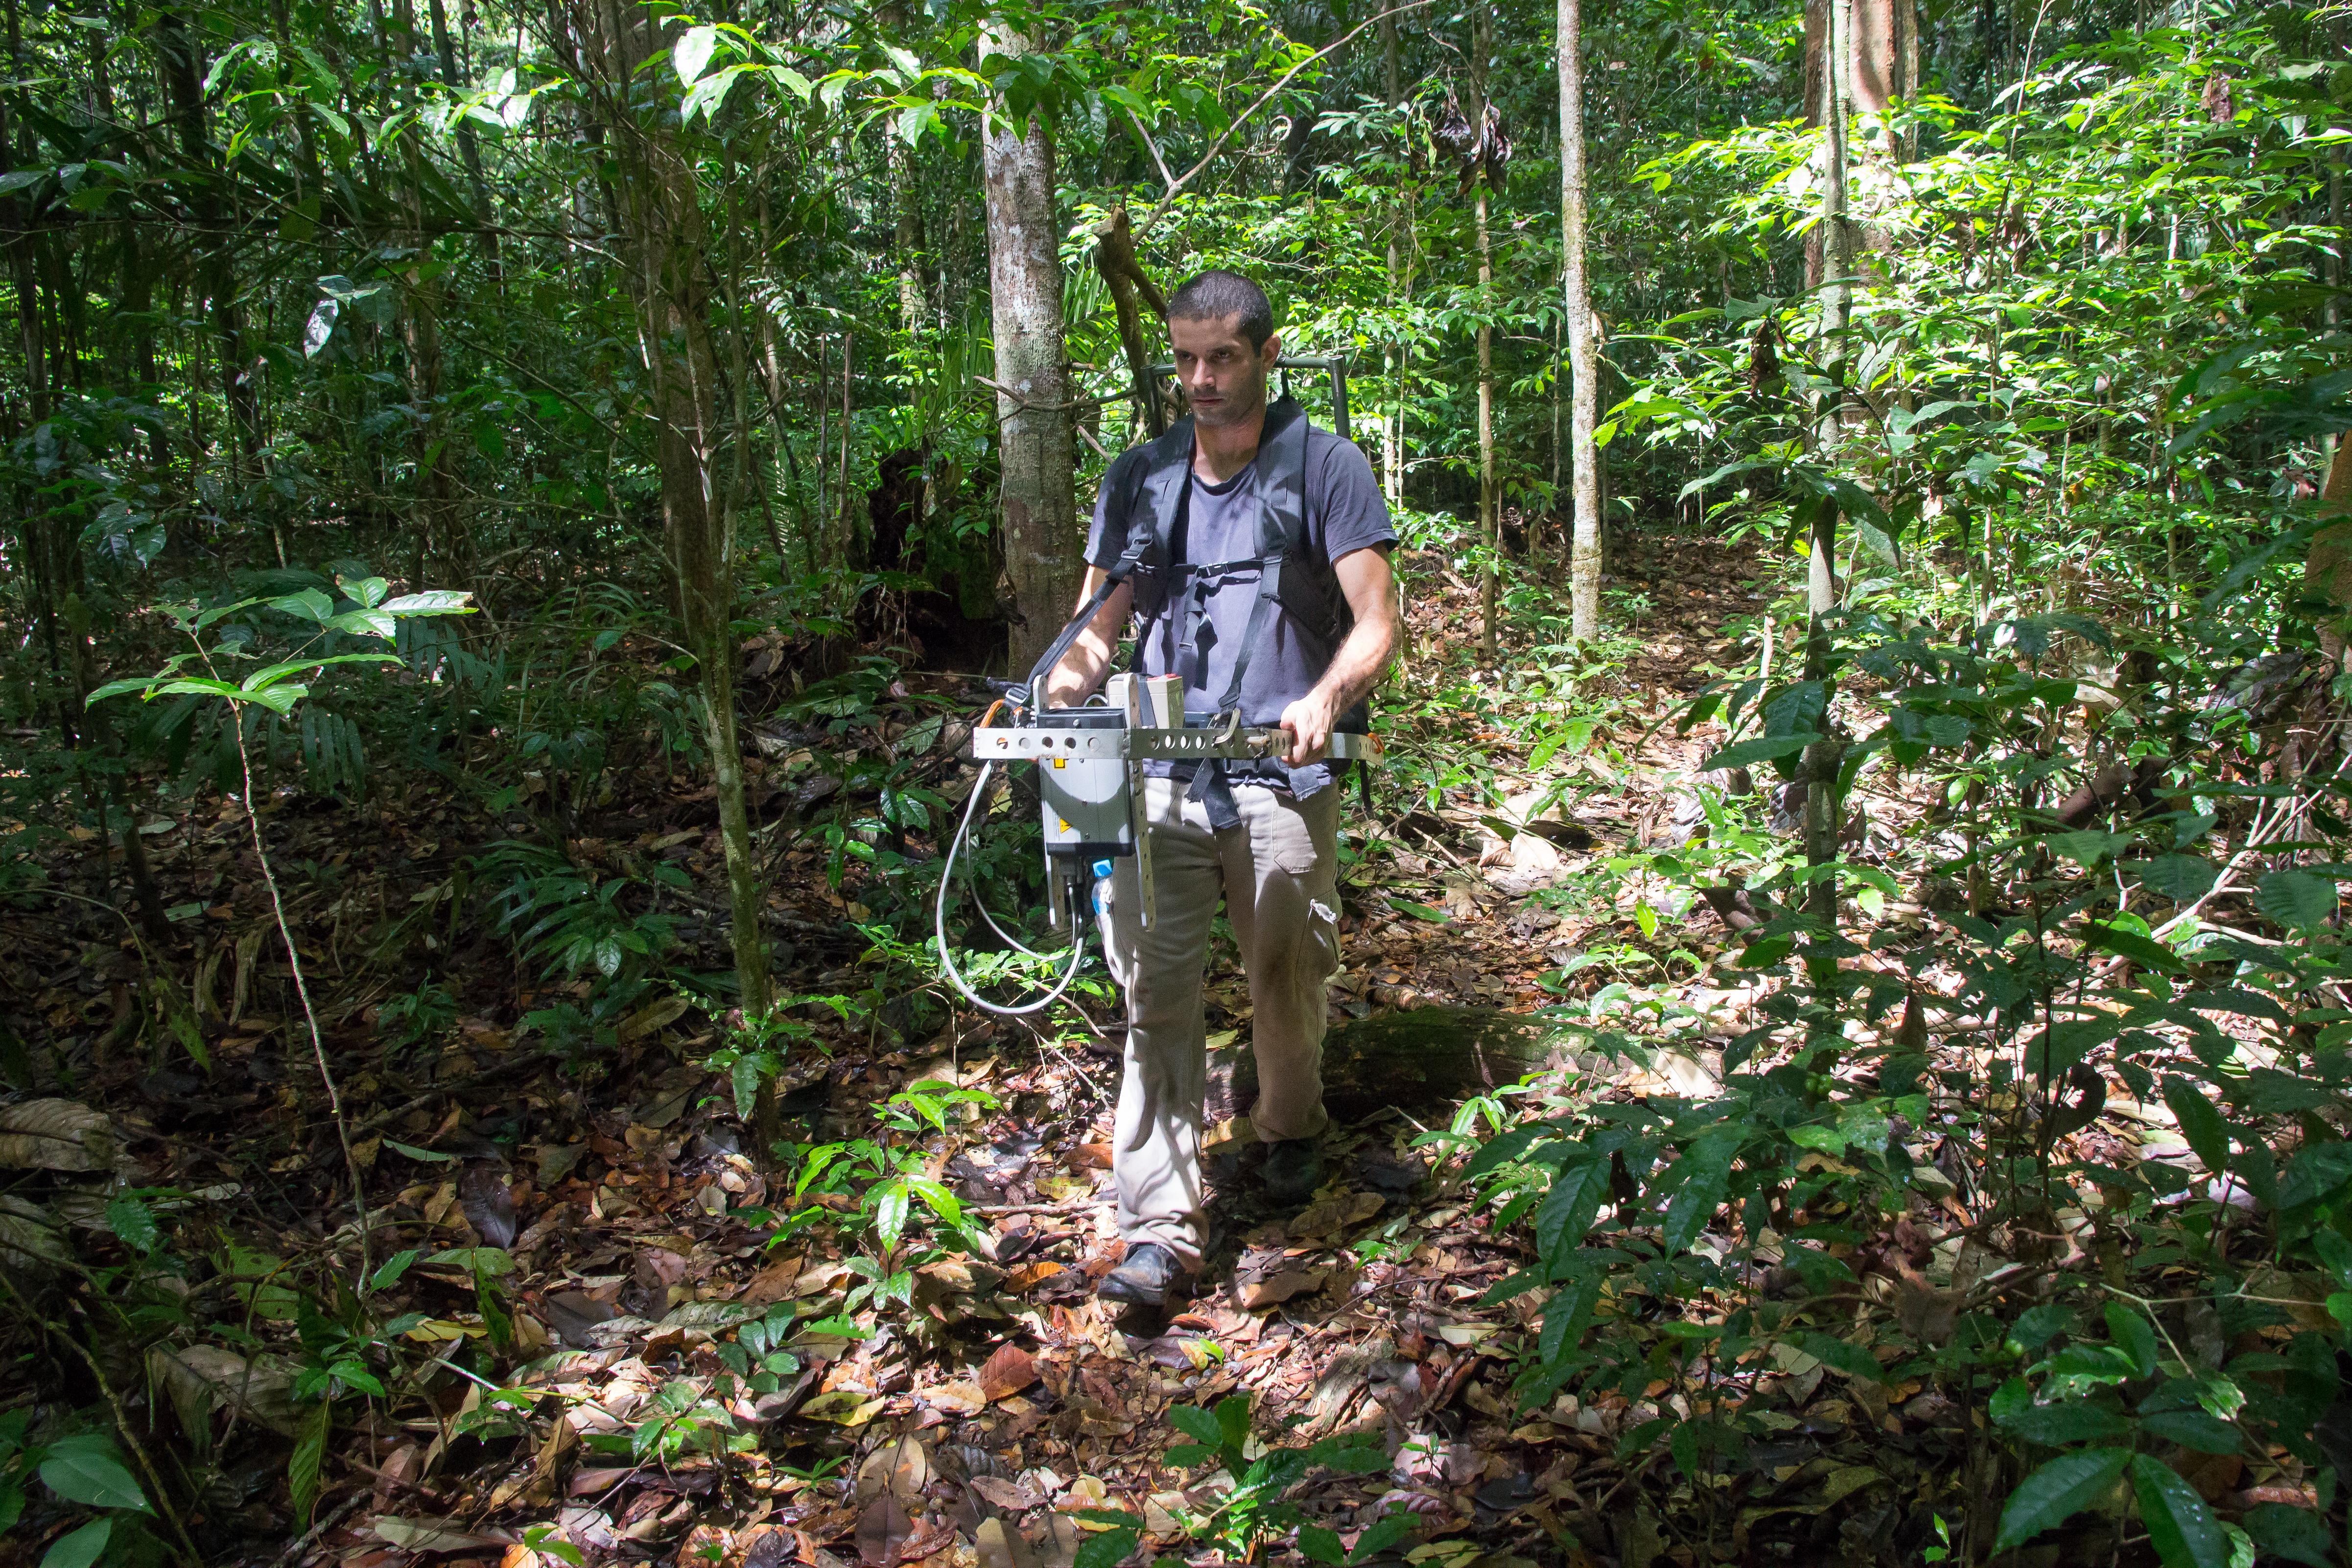 Darlisson Bentes dos Santos uses a portable lidar instrument to collect information on forest vertical structure at the Tapajós National Forest as part of a project led by Smith. Stark and Aragón are also making lidar measurements at the savanna sites near Alter do Chão. [Photo taken by Marielle N. Smith]